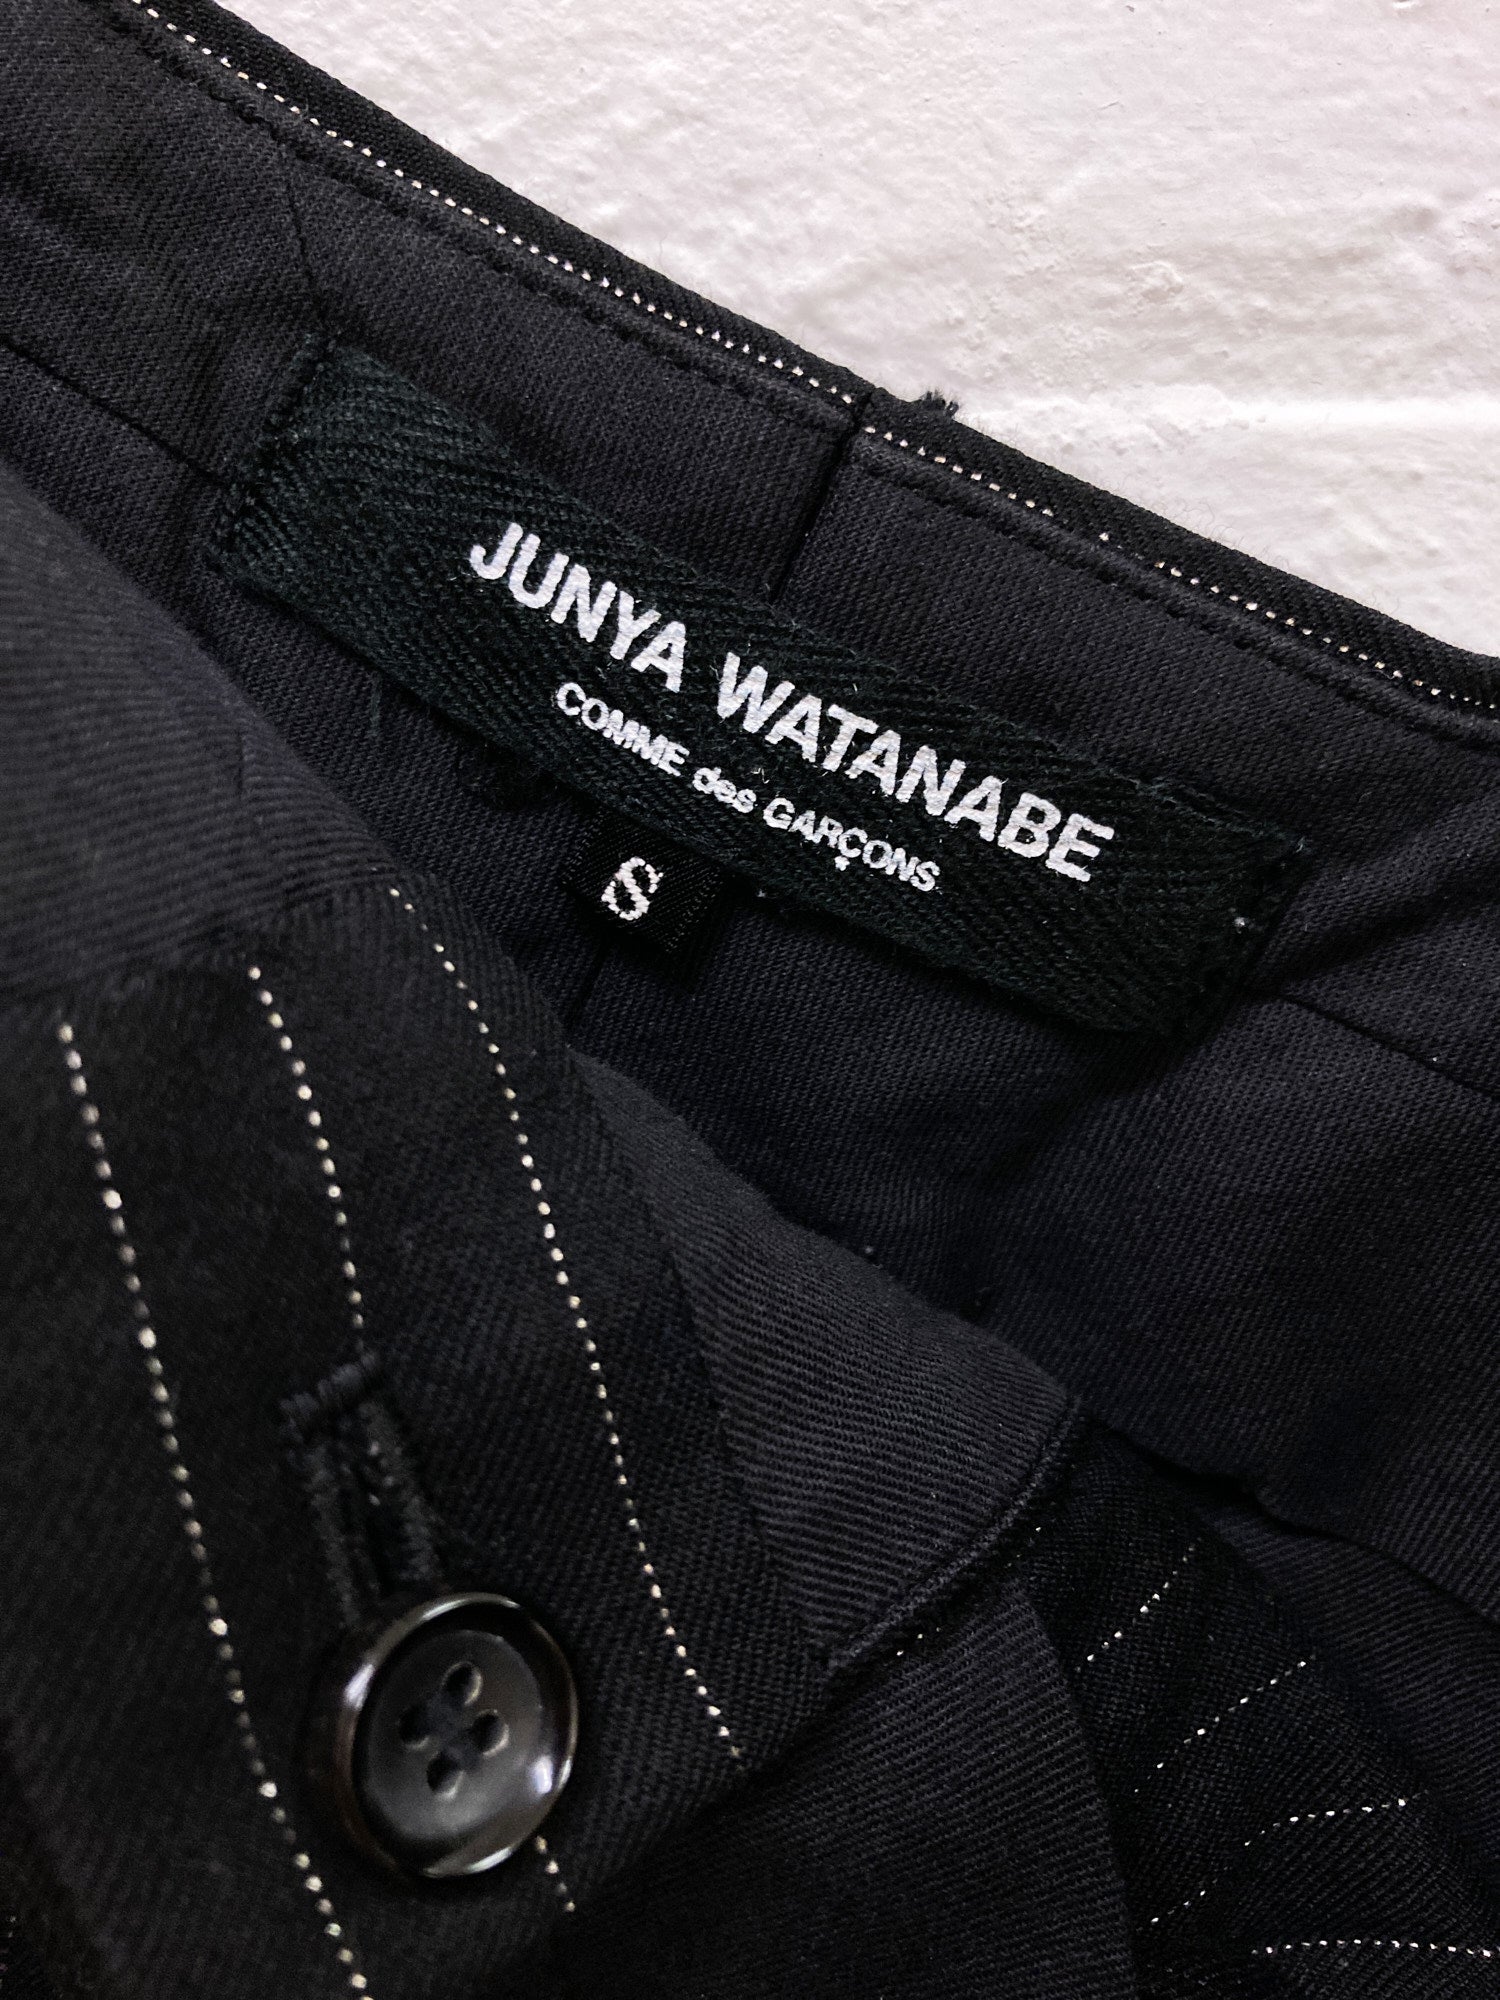 Junya Watanabe Comme des Garcons 2009 black wool shorts with glittery stripe - S